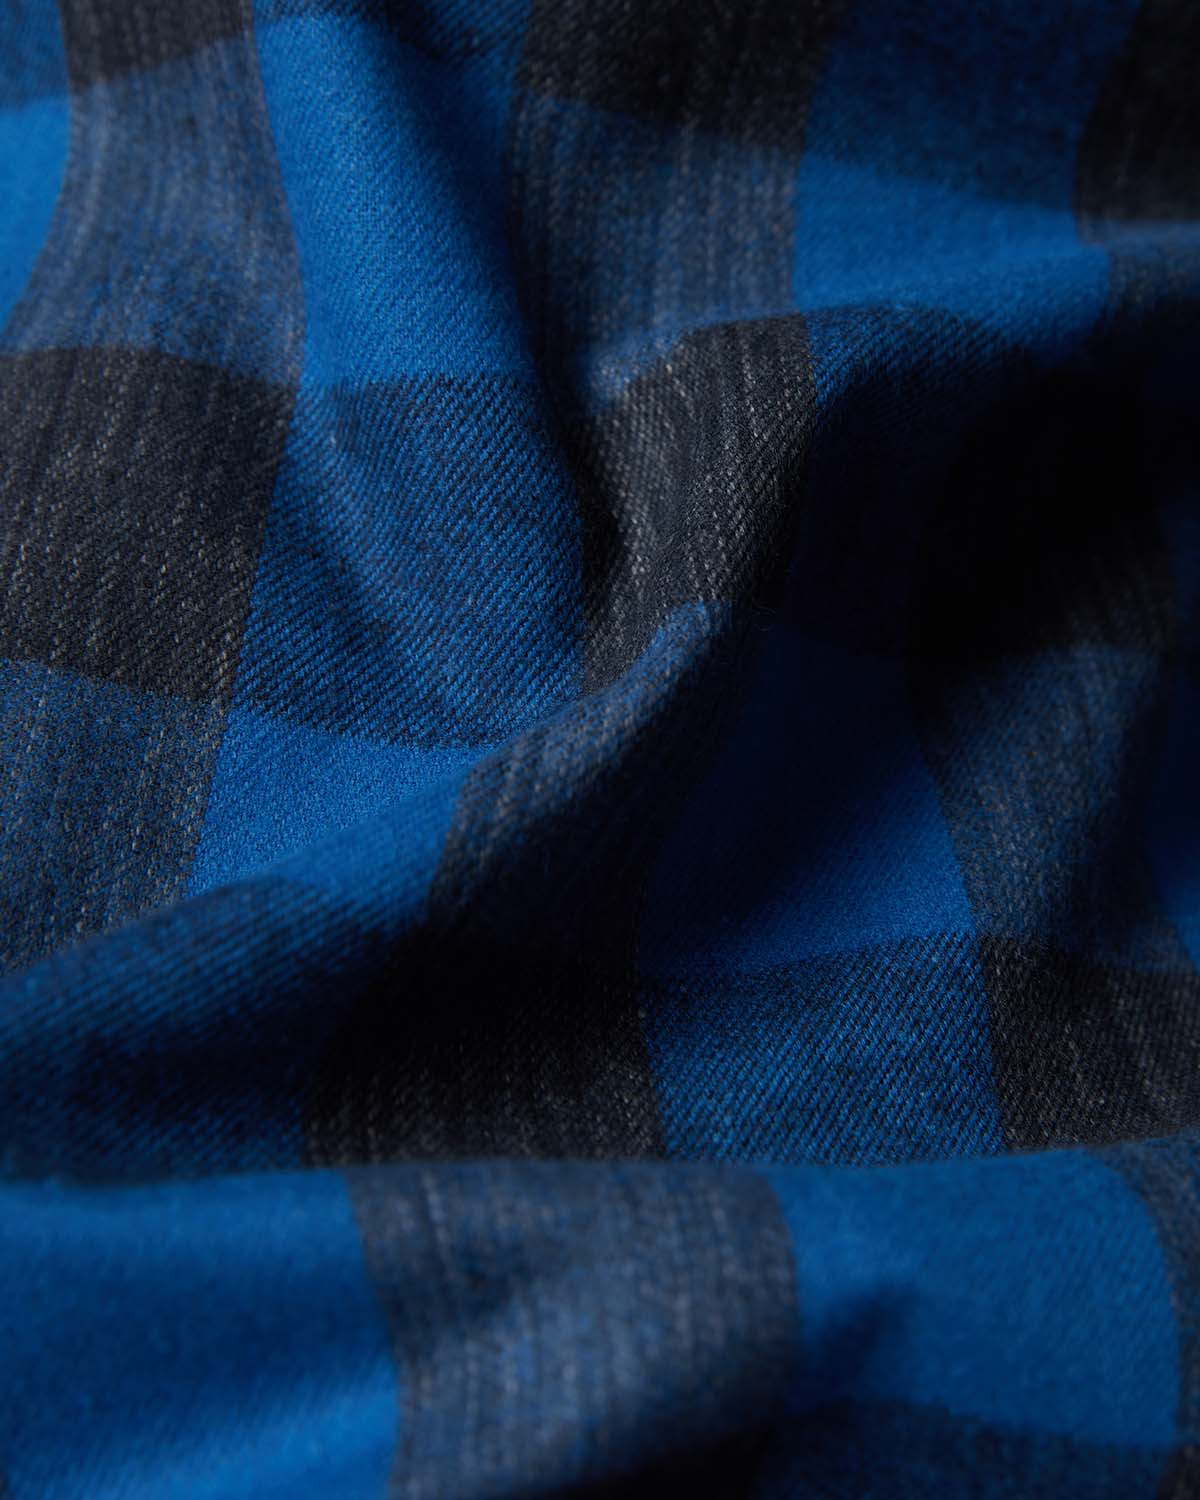 Japanese Flannel Checked Shirt - Blue